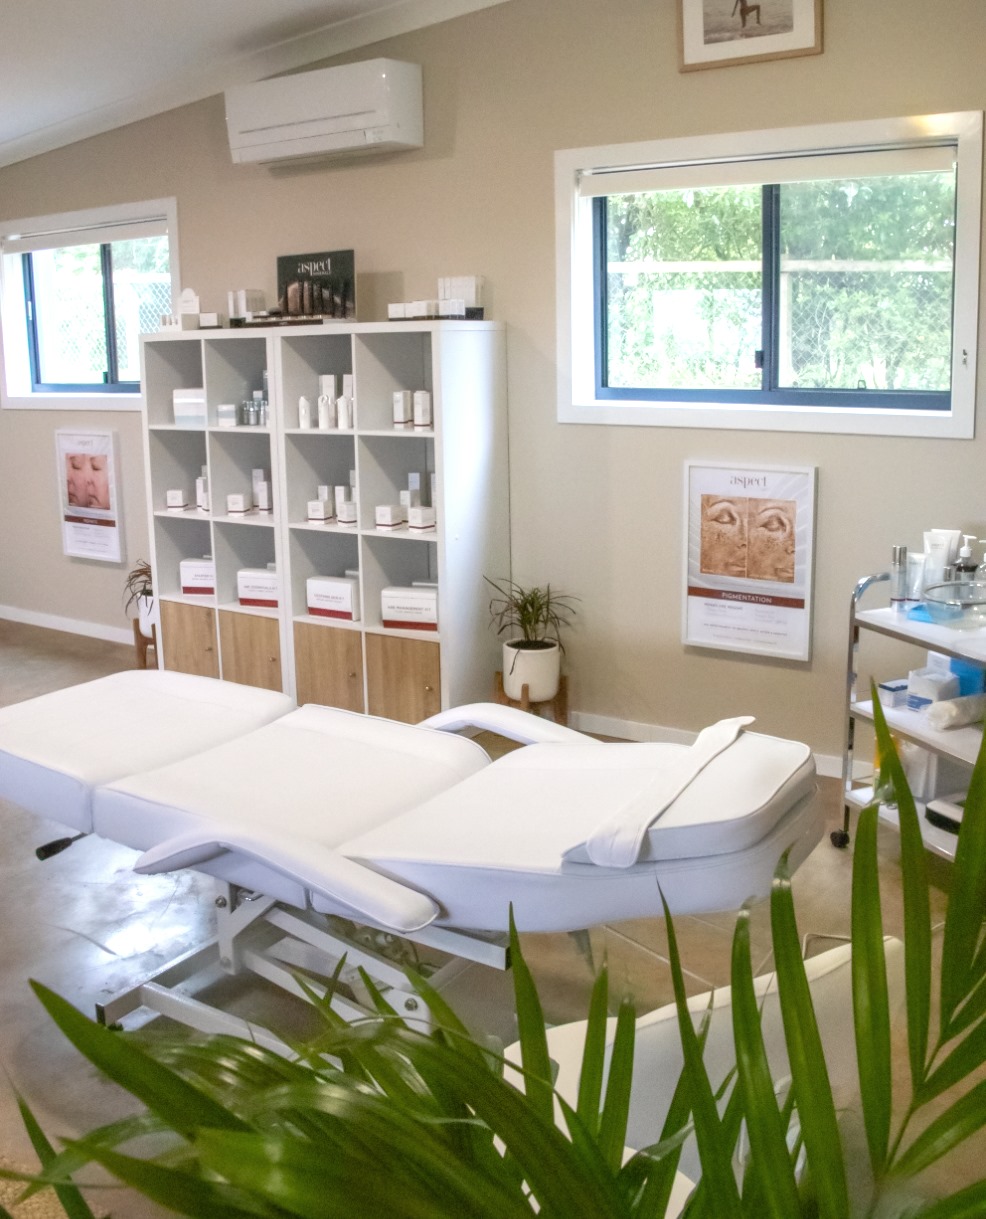 Clunes Cosmetic Clinic | health | 1 Flatley Dr, Clunes NSW 2480, Australia | 0413342235 OR +61 413 342 235